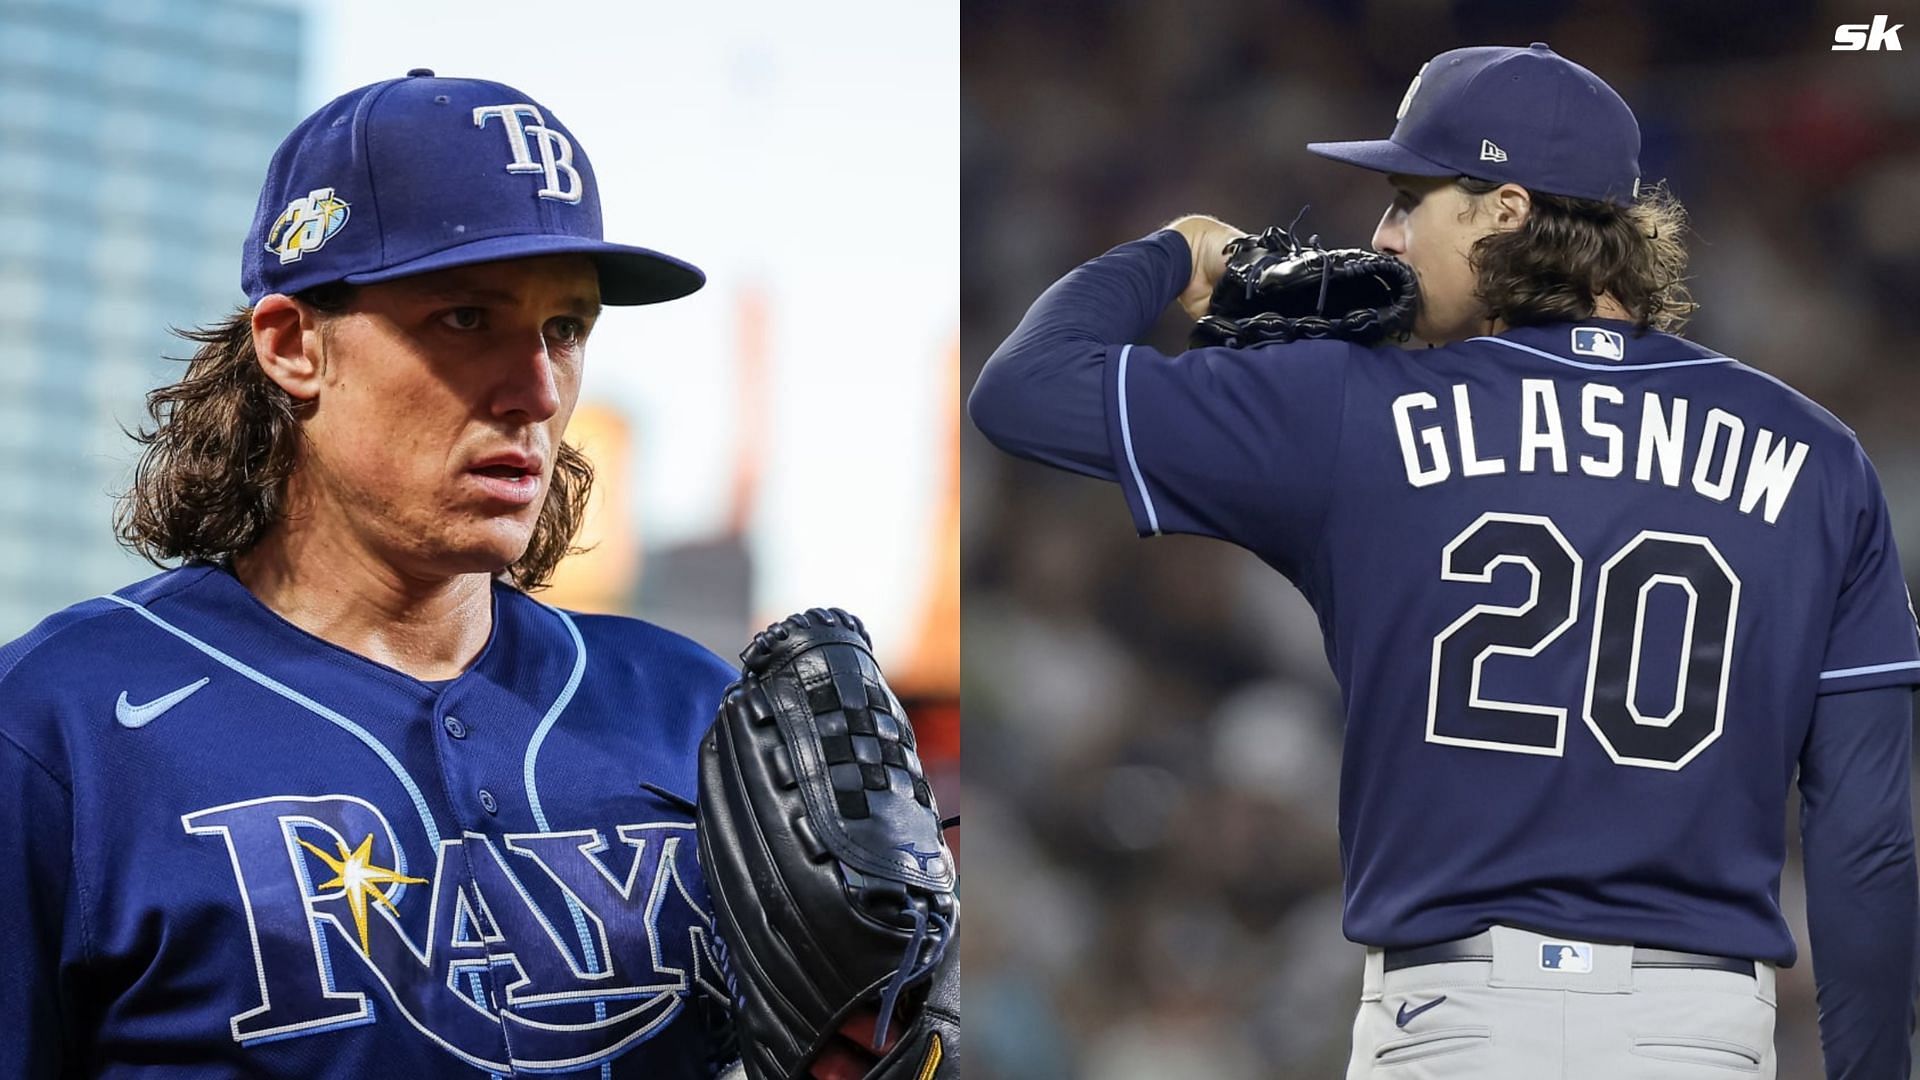 Tyler Glasnow gets traded to the LA Dodgers